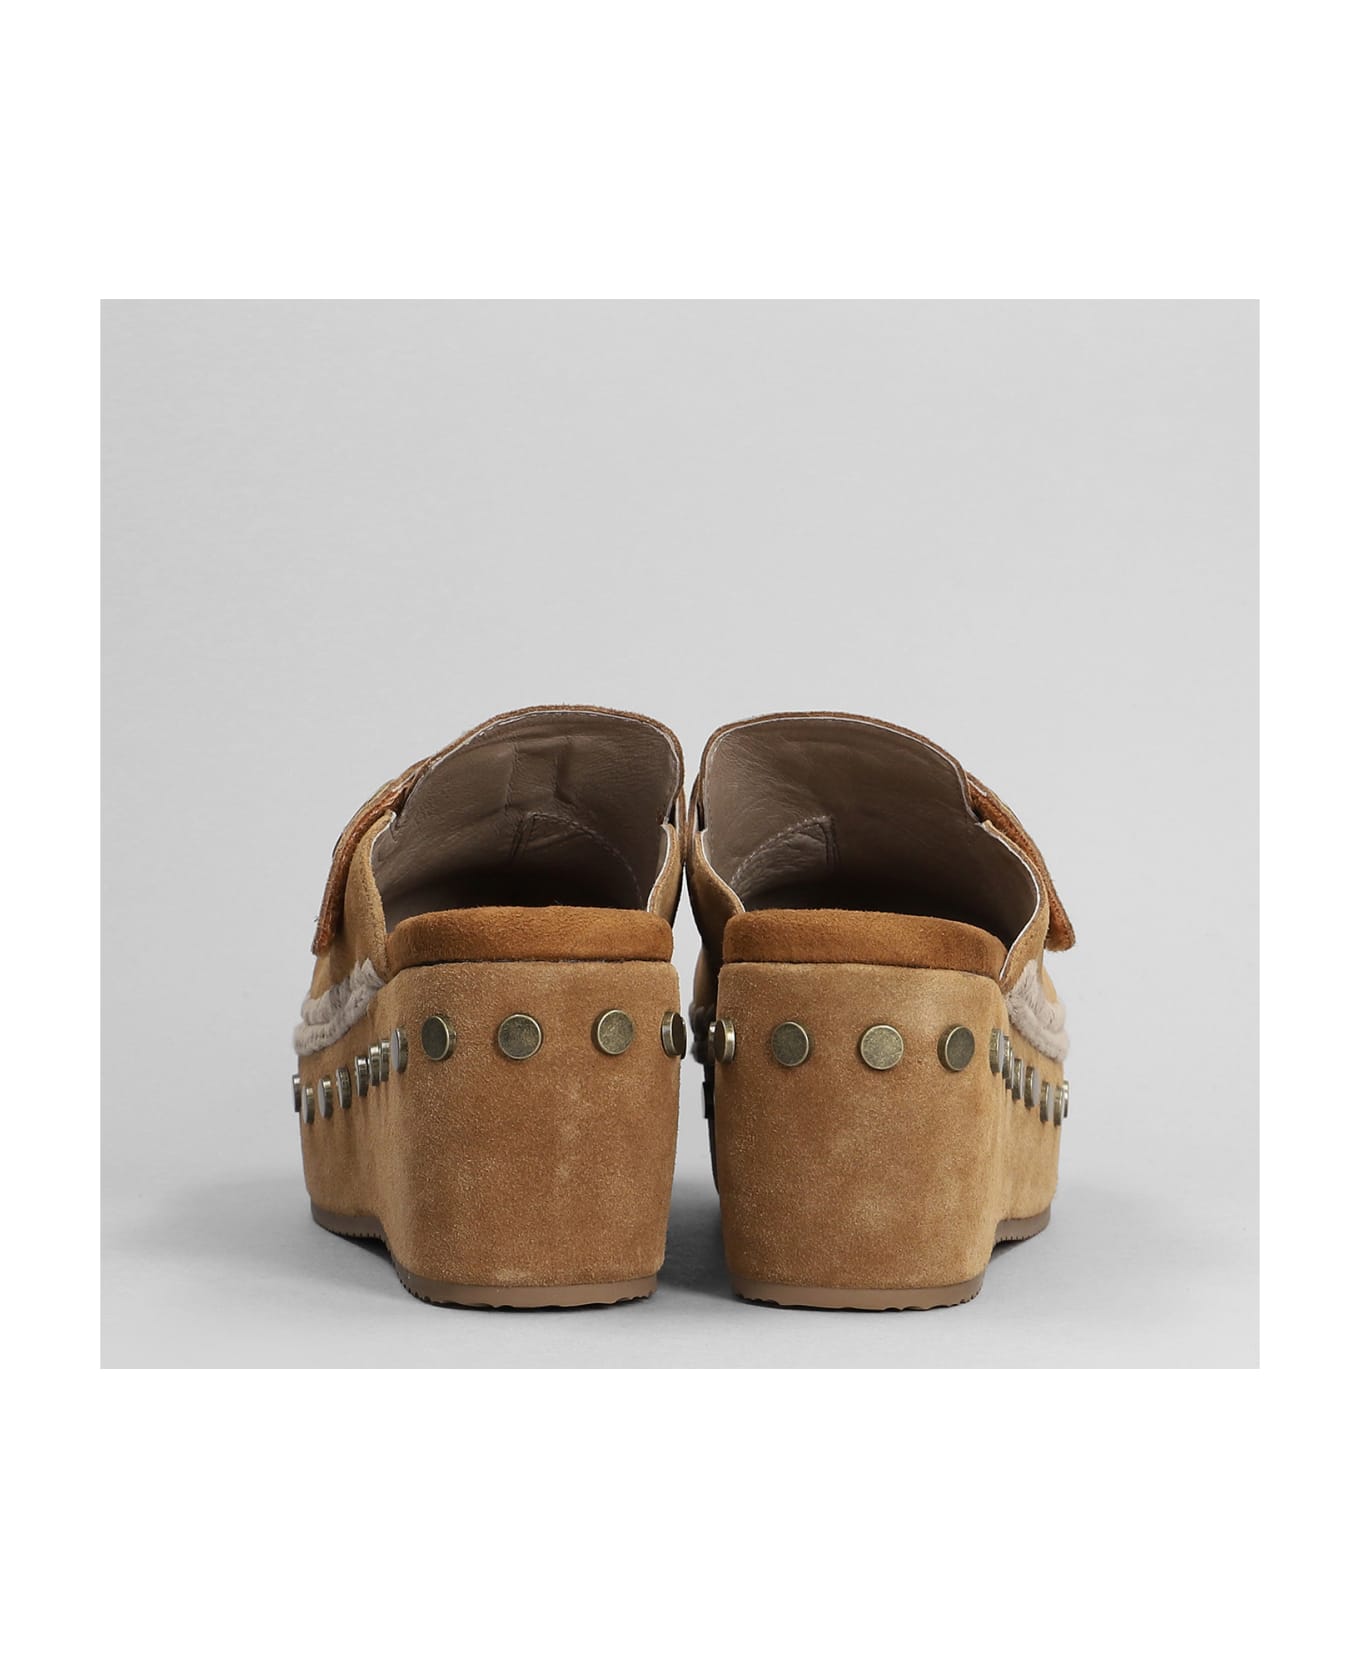 Mou Clog Slipper-mule In Leather Color Suede - leather color サンダル